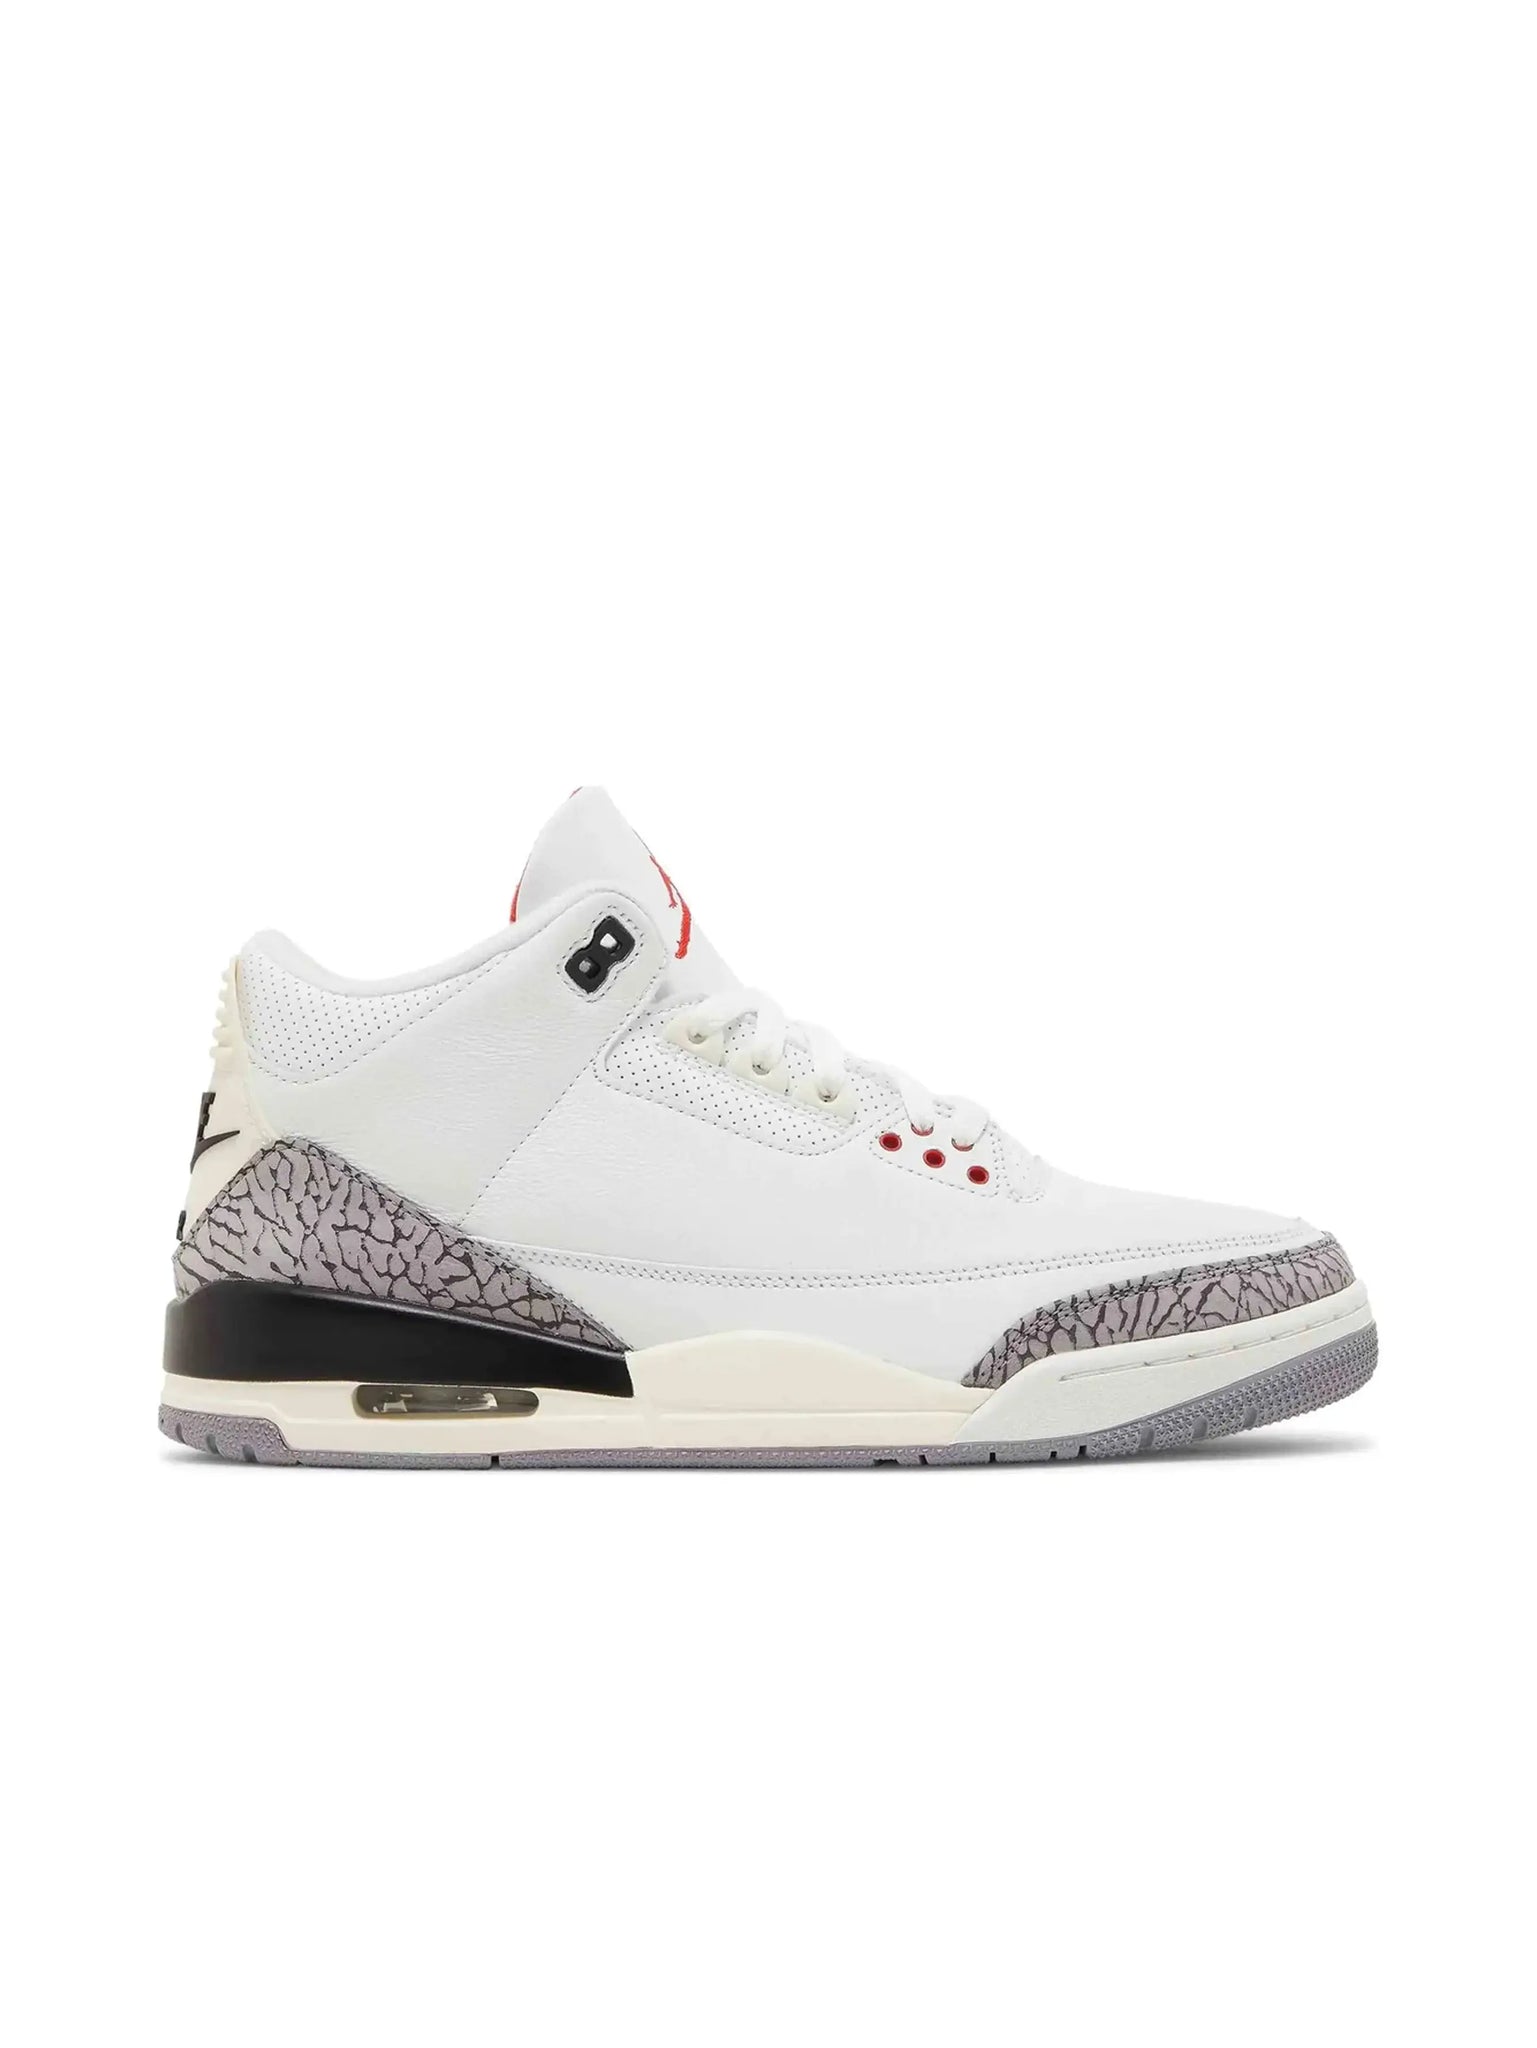 Nike Air Jordan 3 Retro White Cement Reimagined in Auckland, New Zealand - Shop name